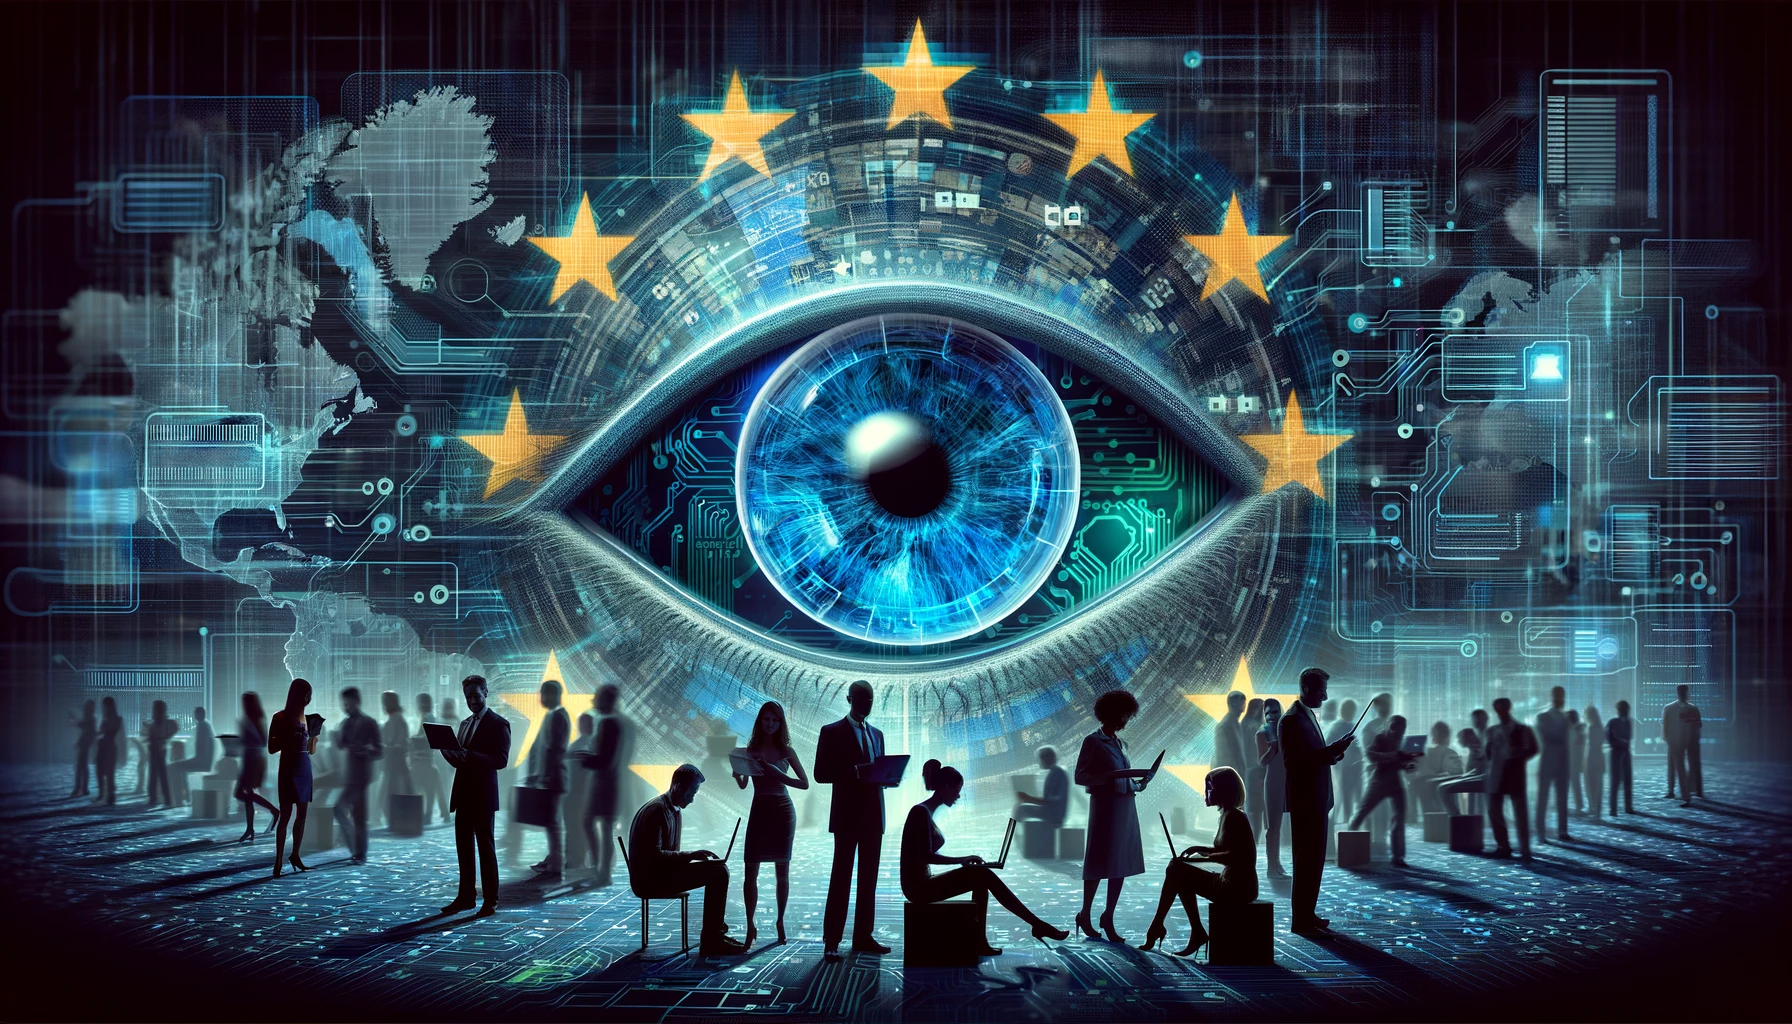 A digital collage illustrating the concept of internet surveillance and encryption in Europe.